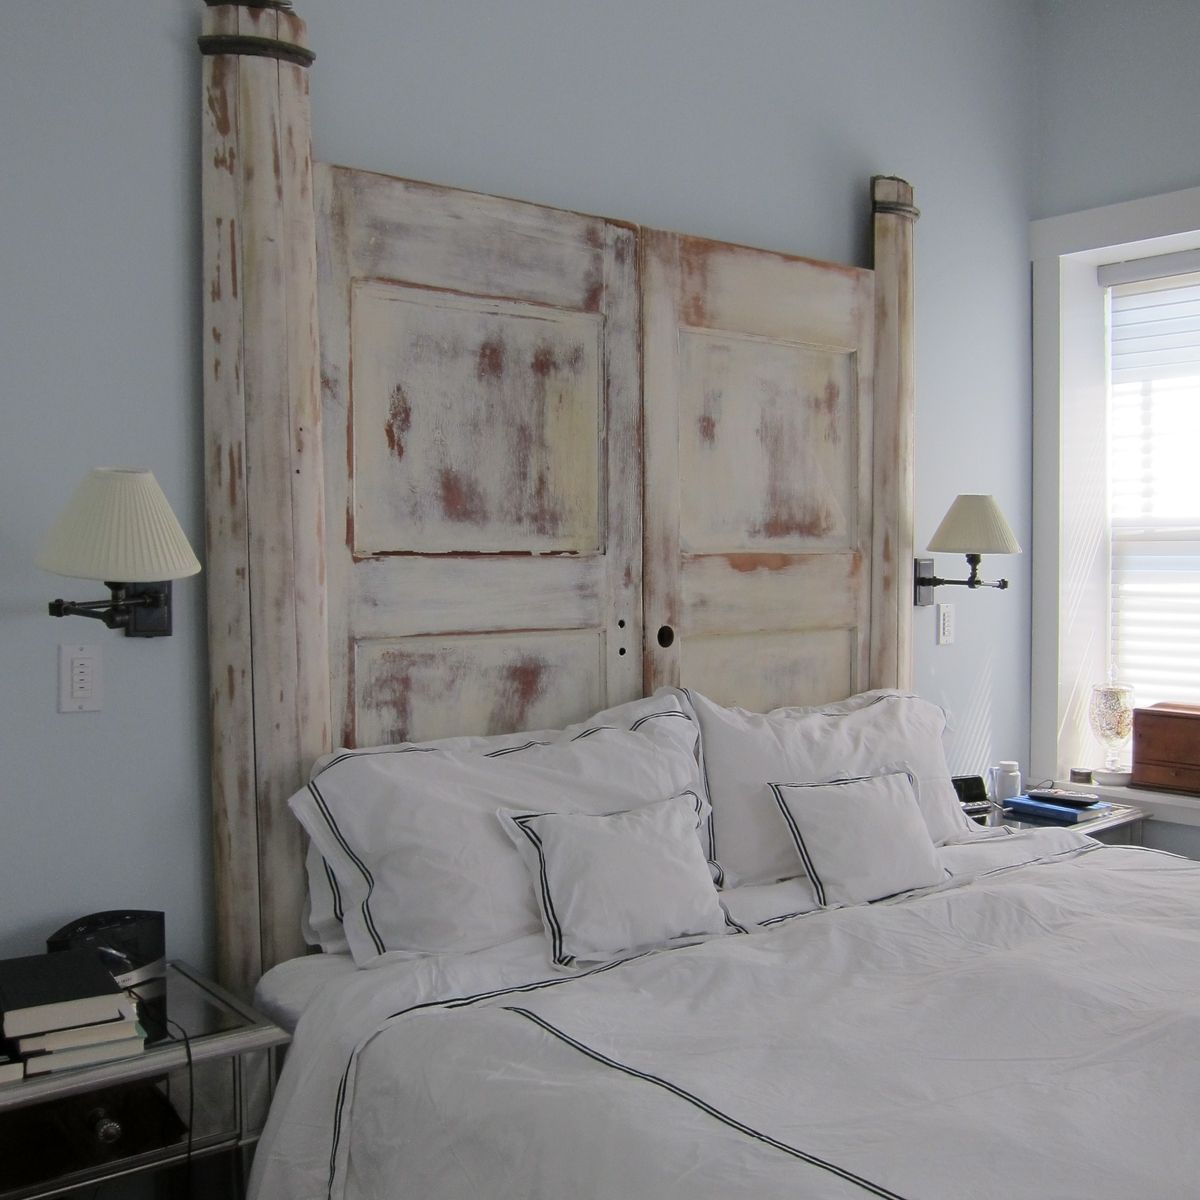 Custom King Size Bed With Storage And, How Do You Make A King Size Bed Headboard